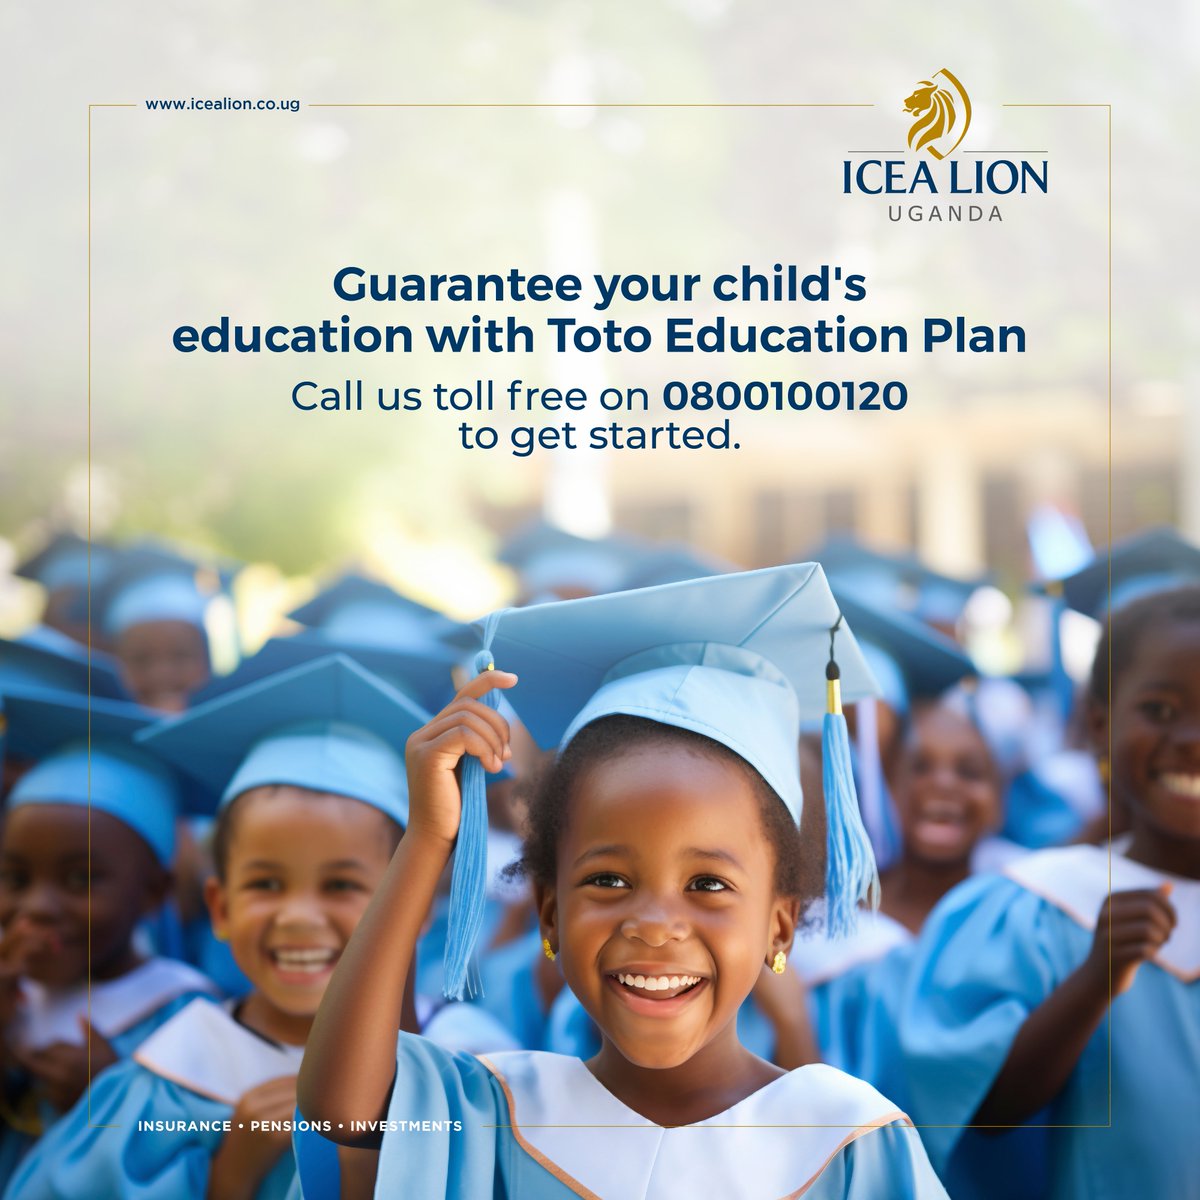 Start the Toto Education Plan today and ensure your child's education. #ICEALIONUg